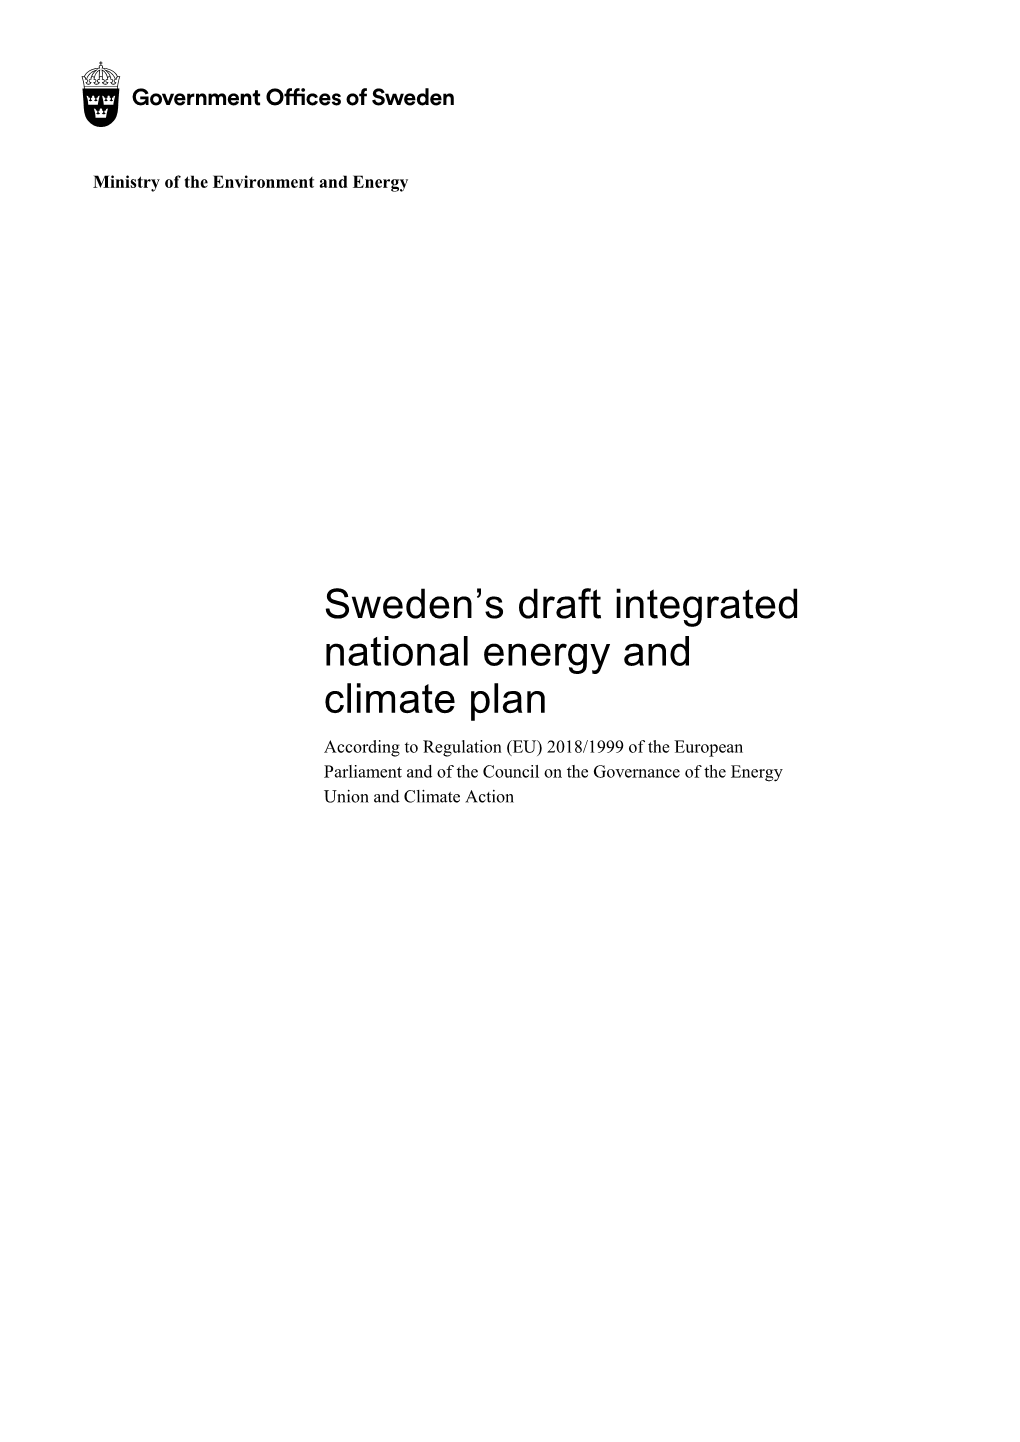 Sweden's Draft Integrated National Energy and Climate Plan